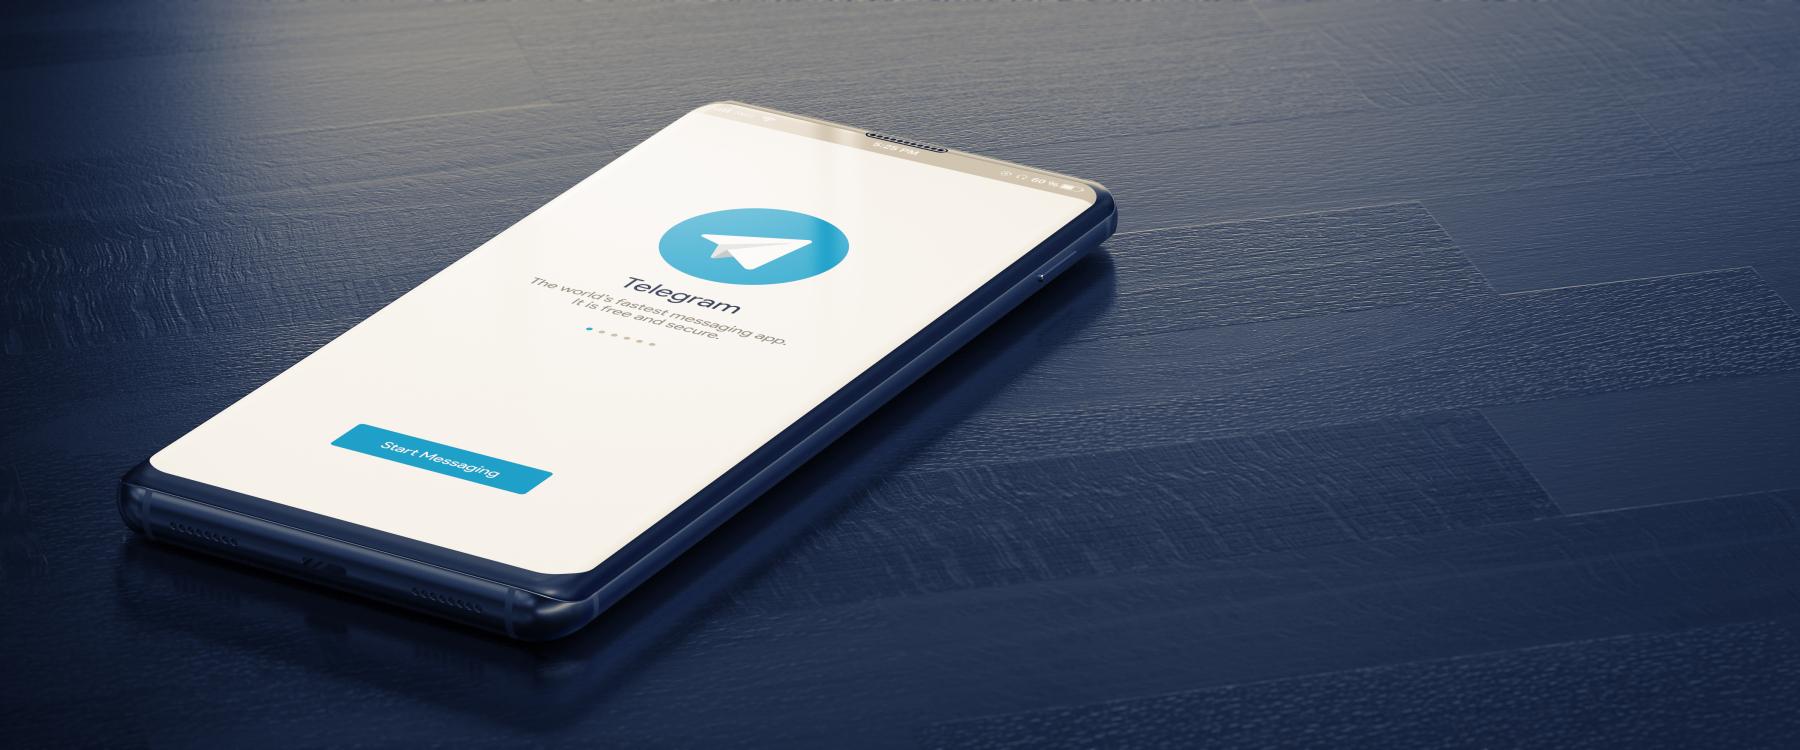 Buy anonymous Telegram accounts with Toncoin
